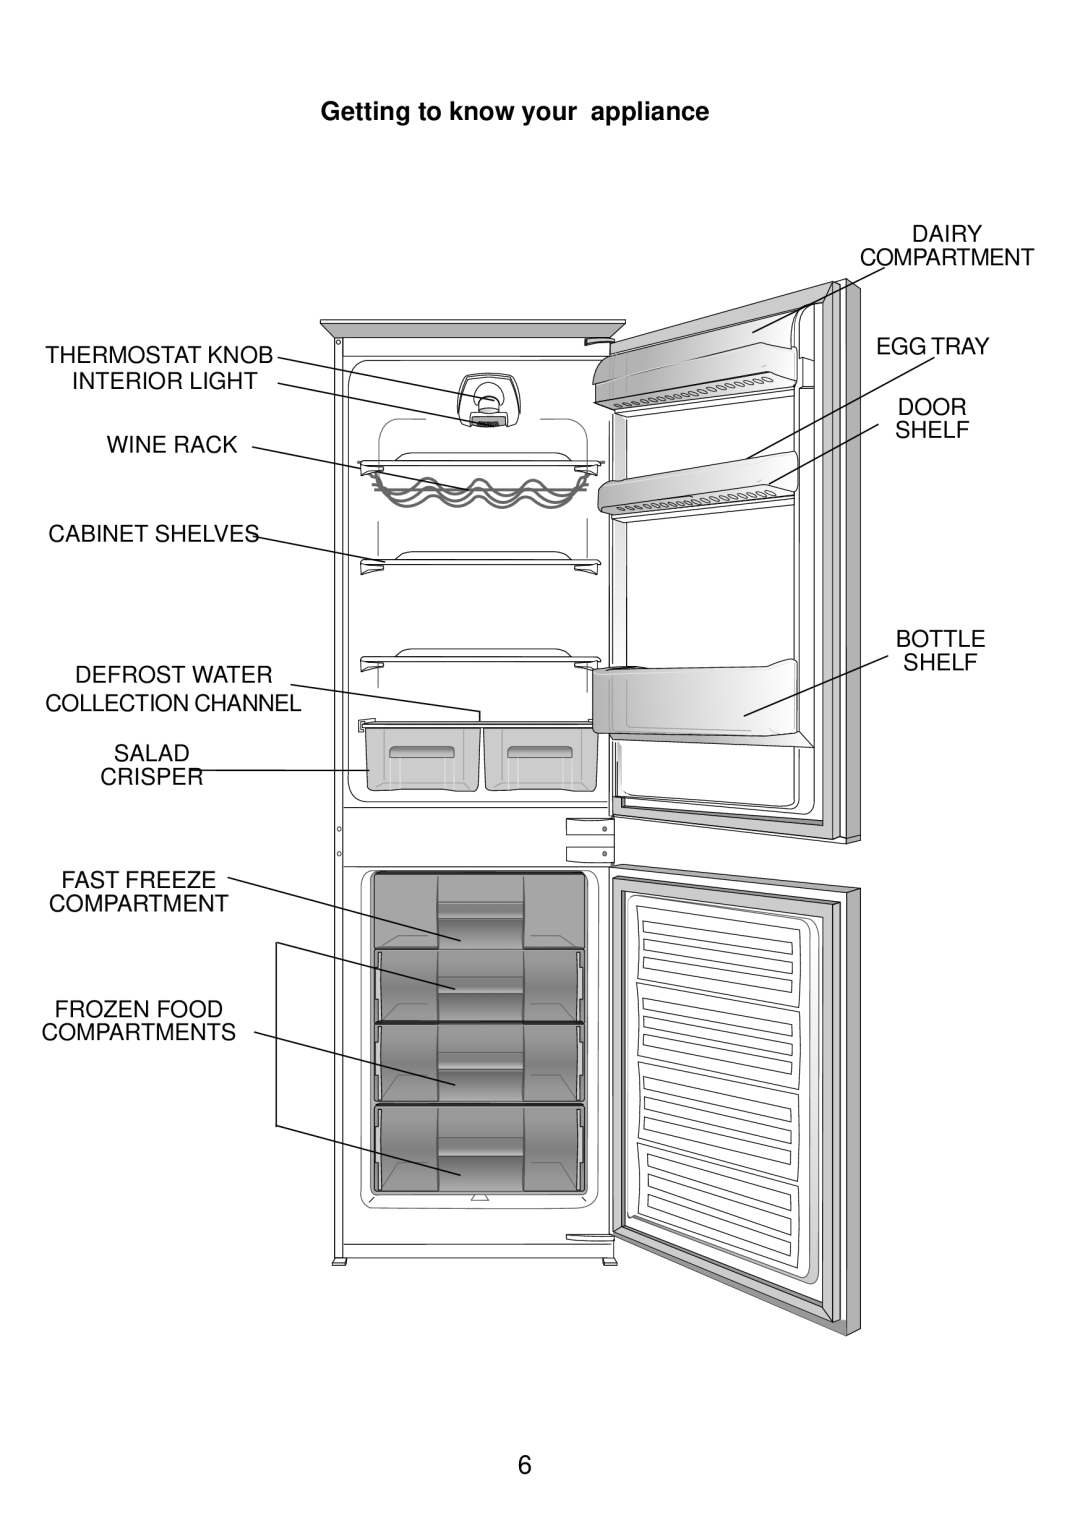 Glen Dimplex Home Appliances Ltd BE817 manual Getting to know your appliance, Compartment Frozen Food Compartments 